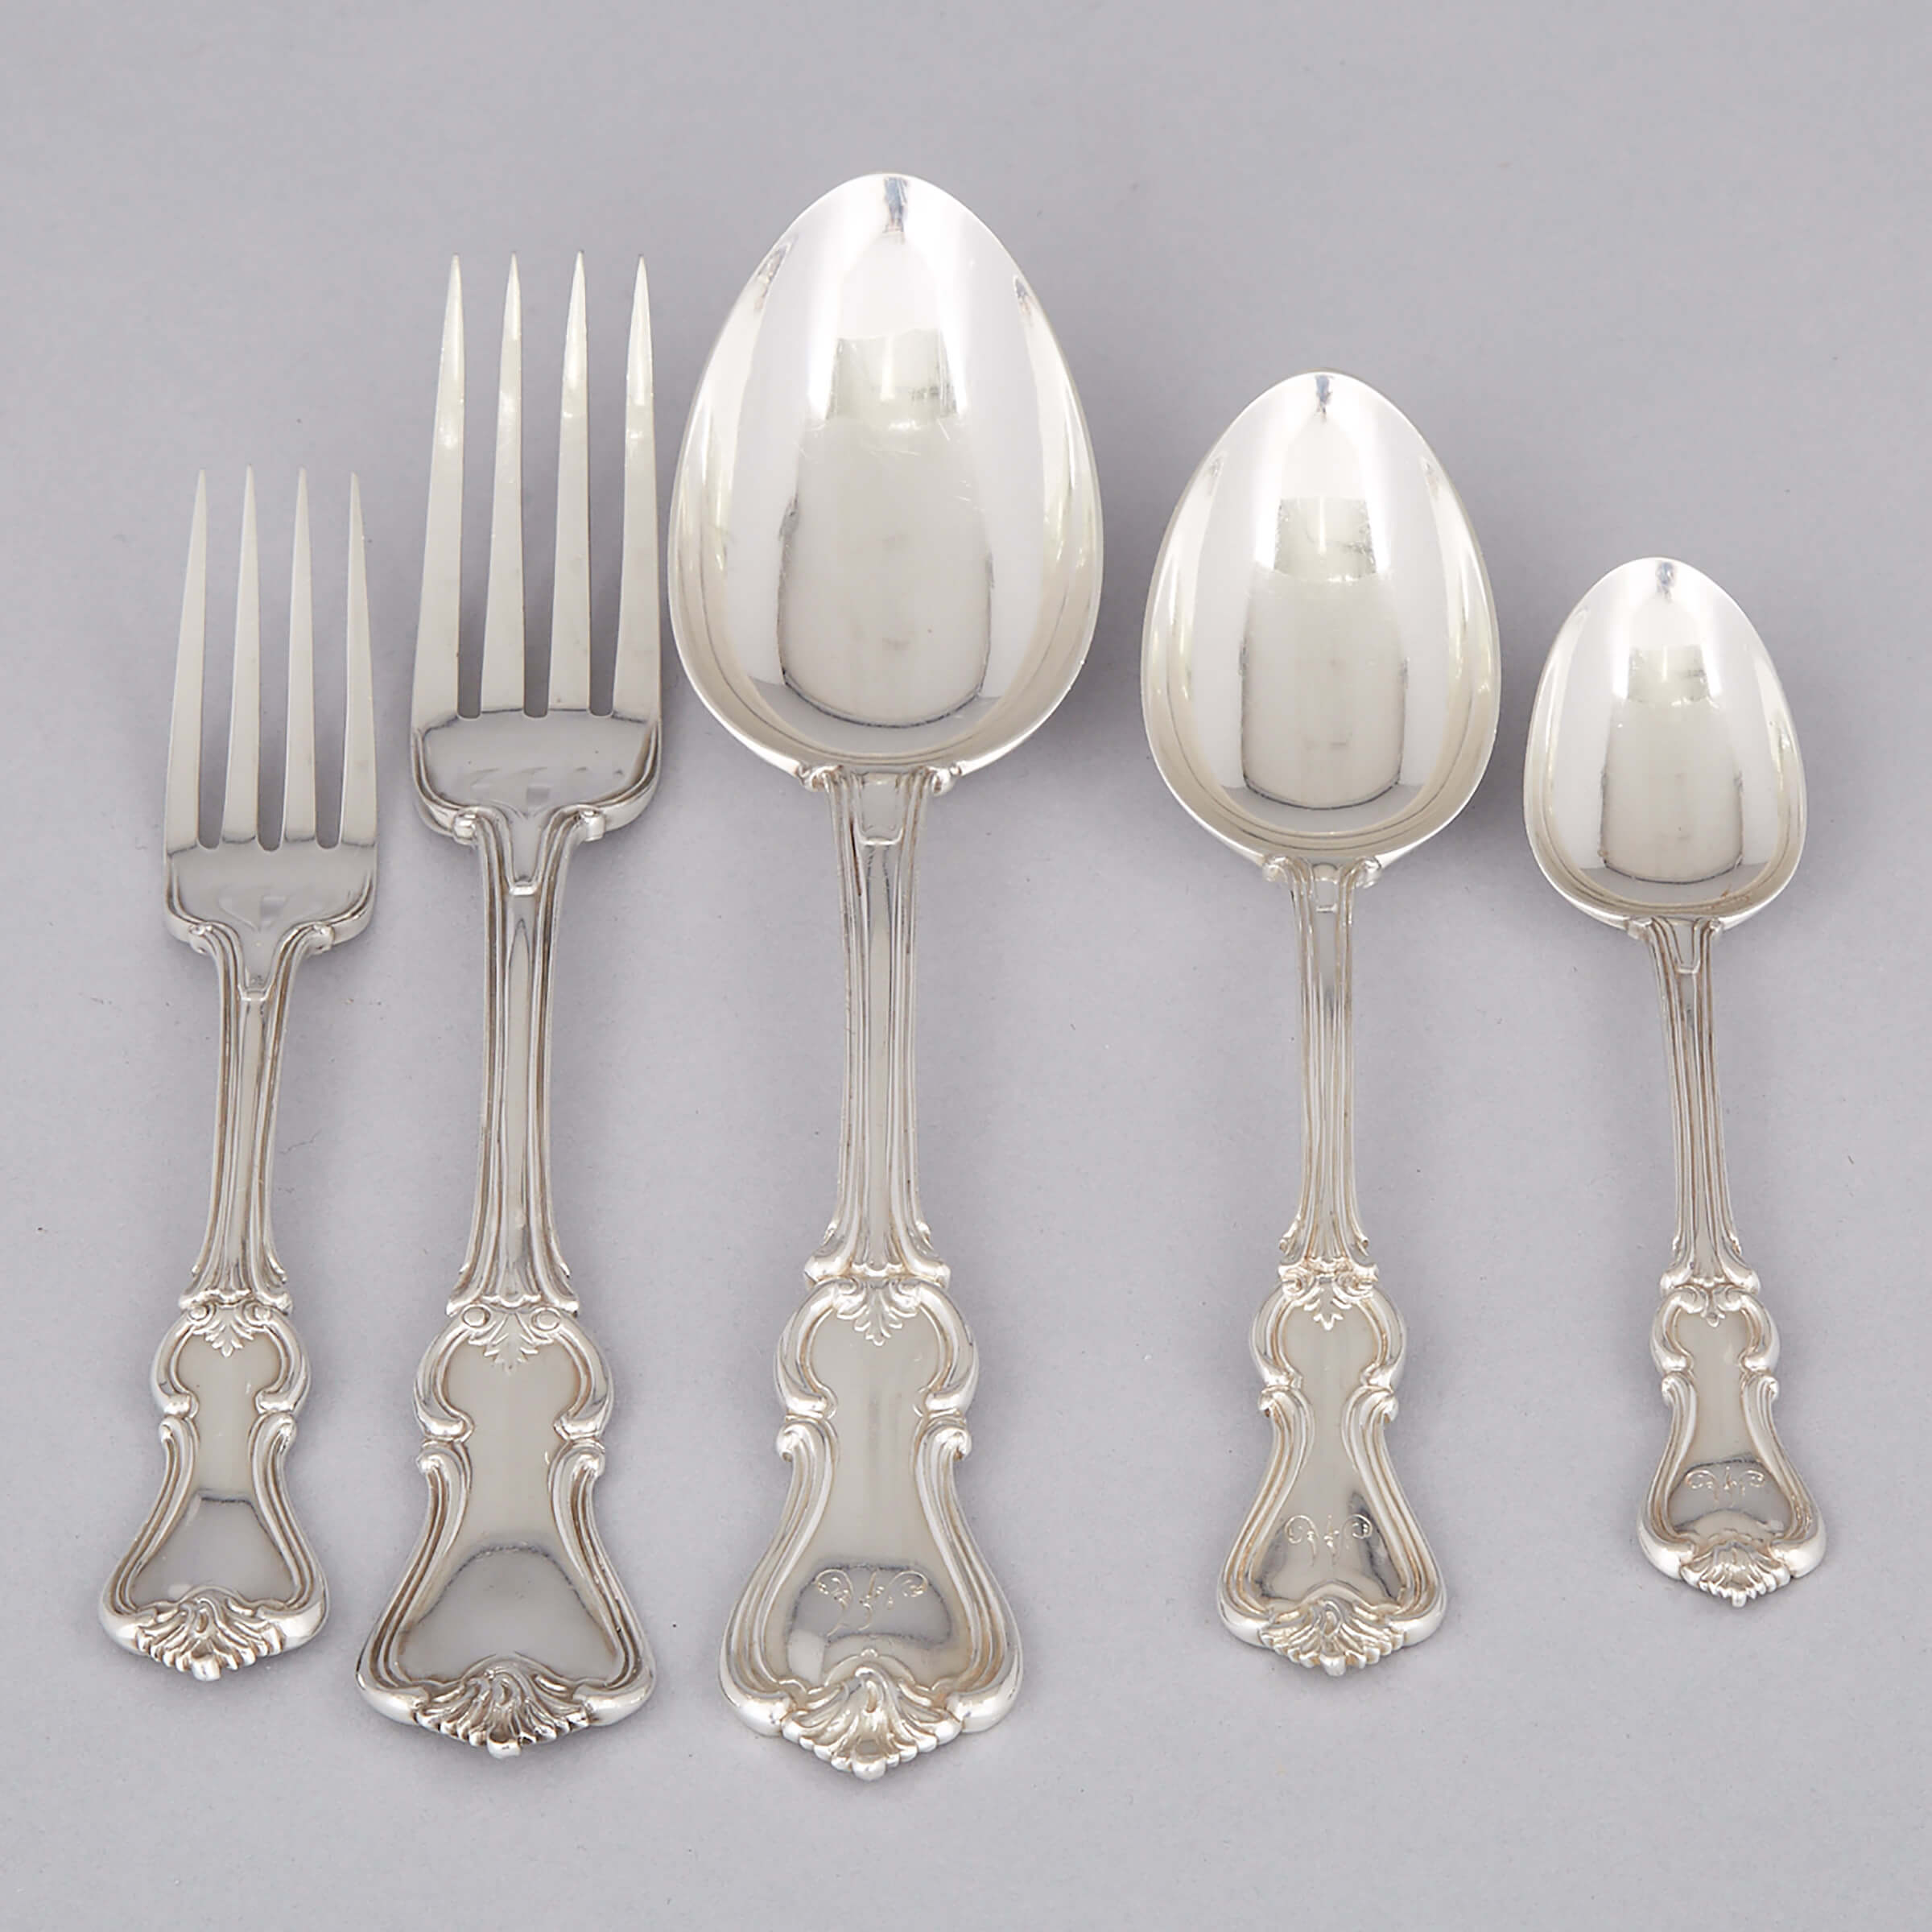 Victorian Silver Albert Pattern Flatware Service, mainly William Eaton and Charles Boyton, London, 1842-50